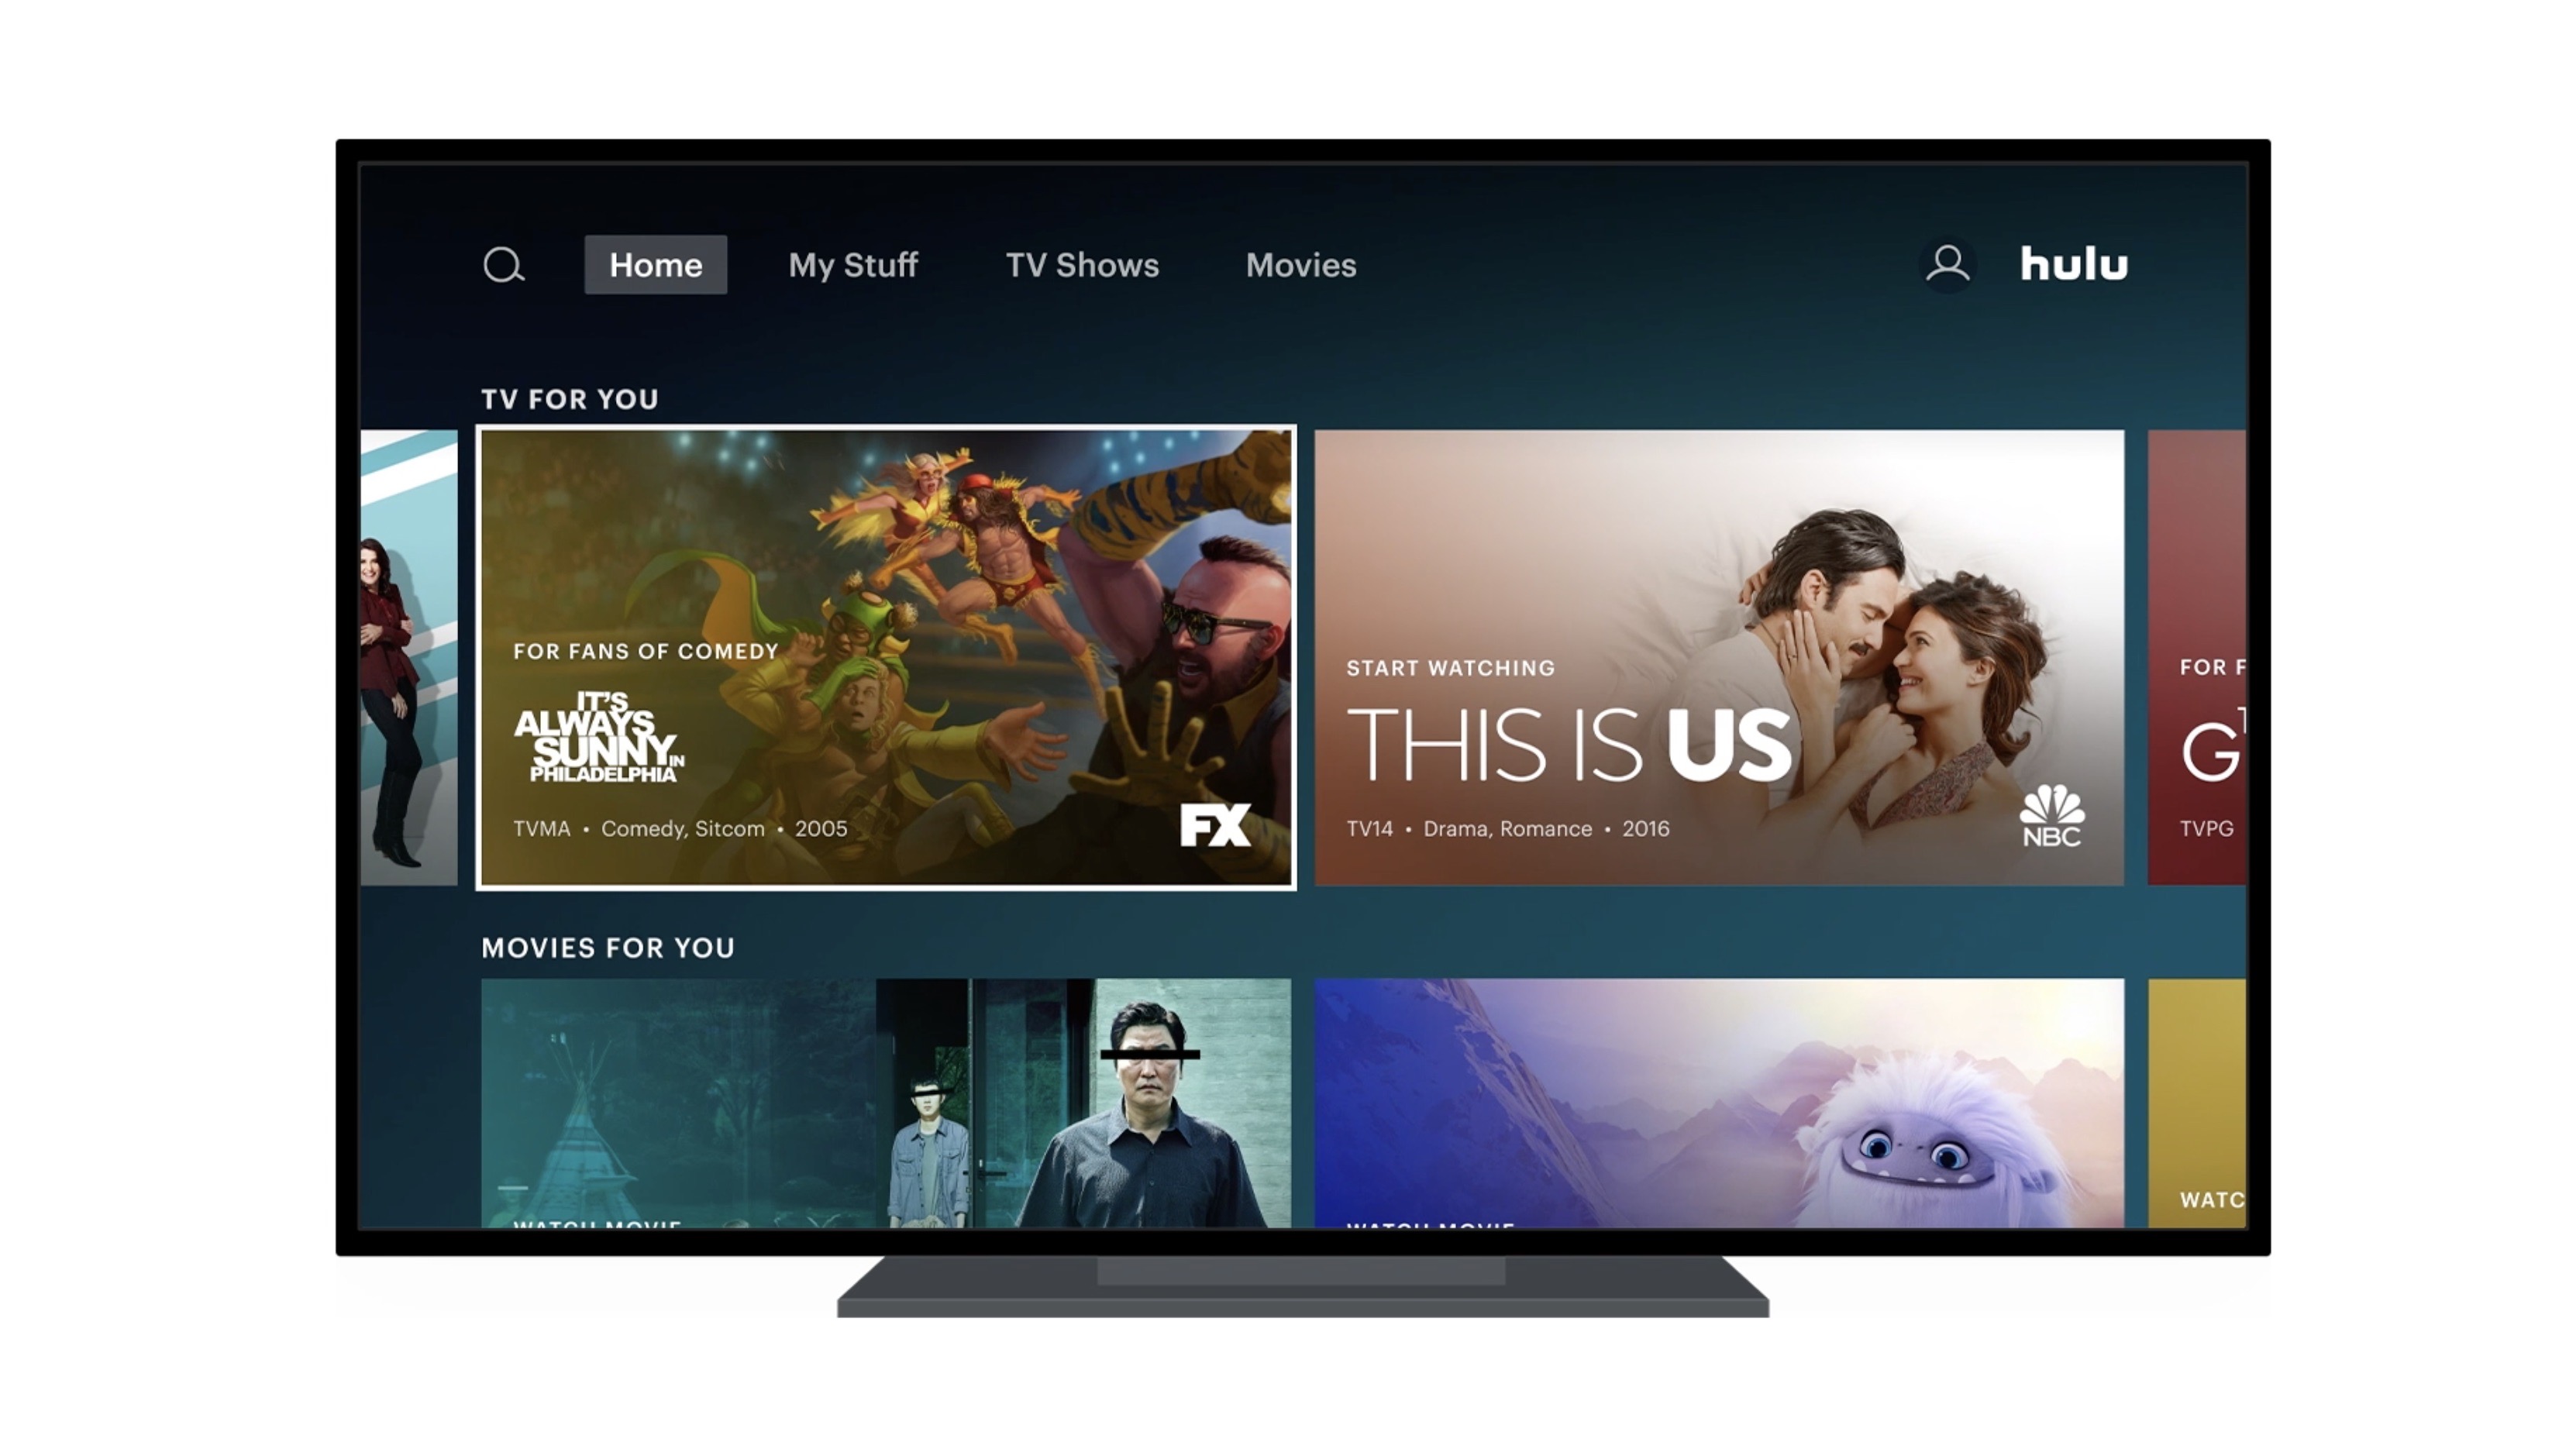 Hulu unveils new Apple TV interface with updated navigation, improved recommendations